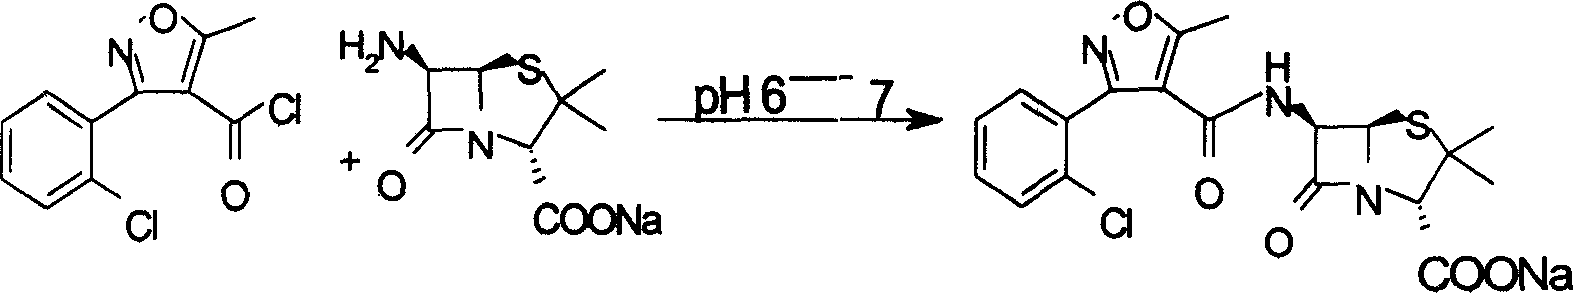 Synthesis of austrastaph